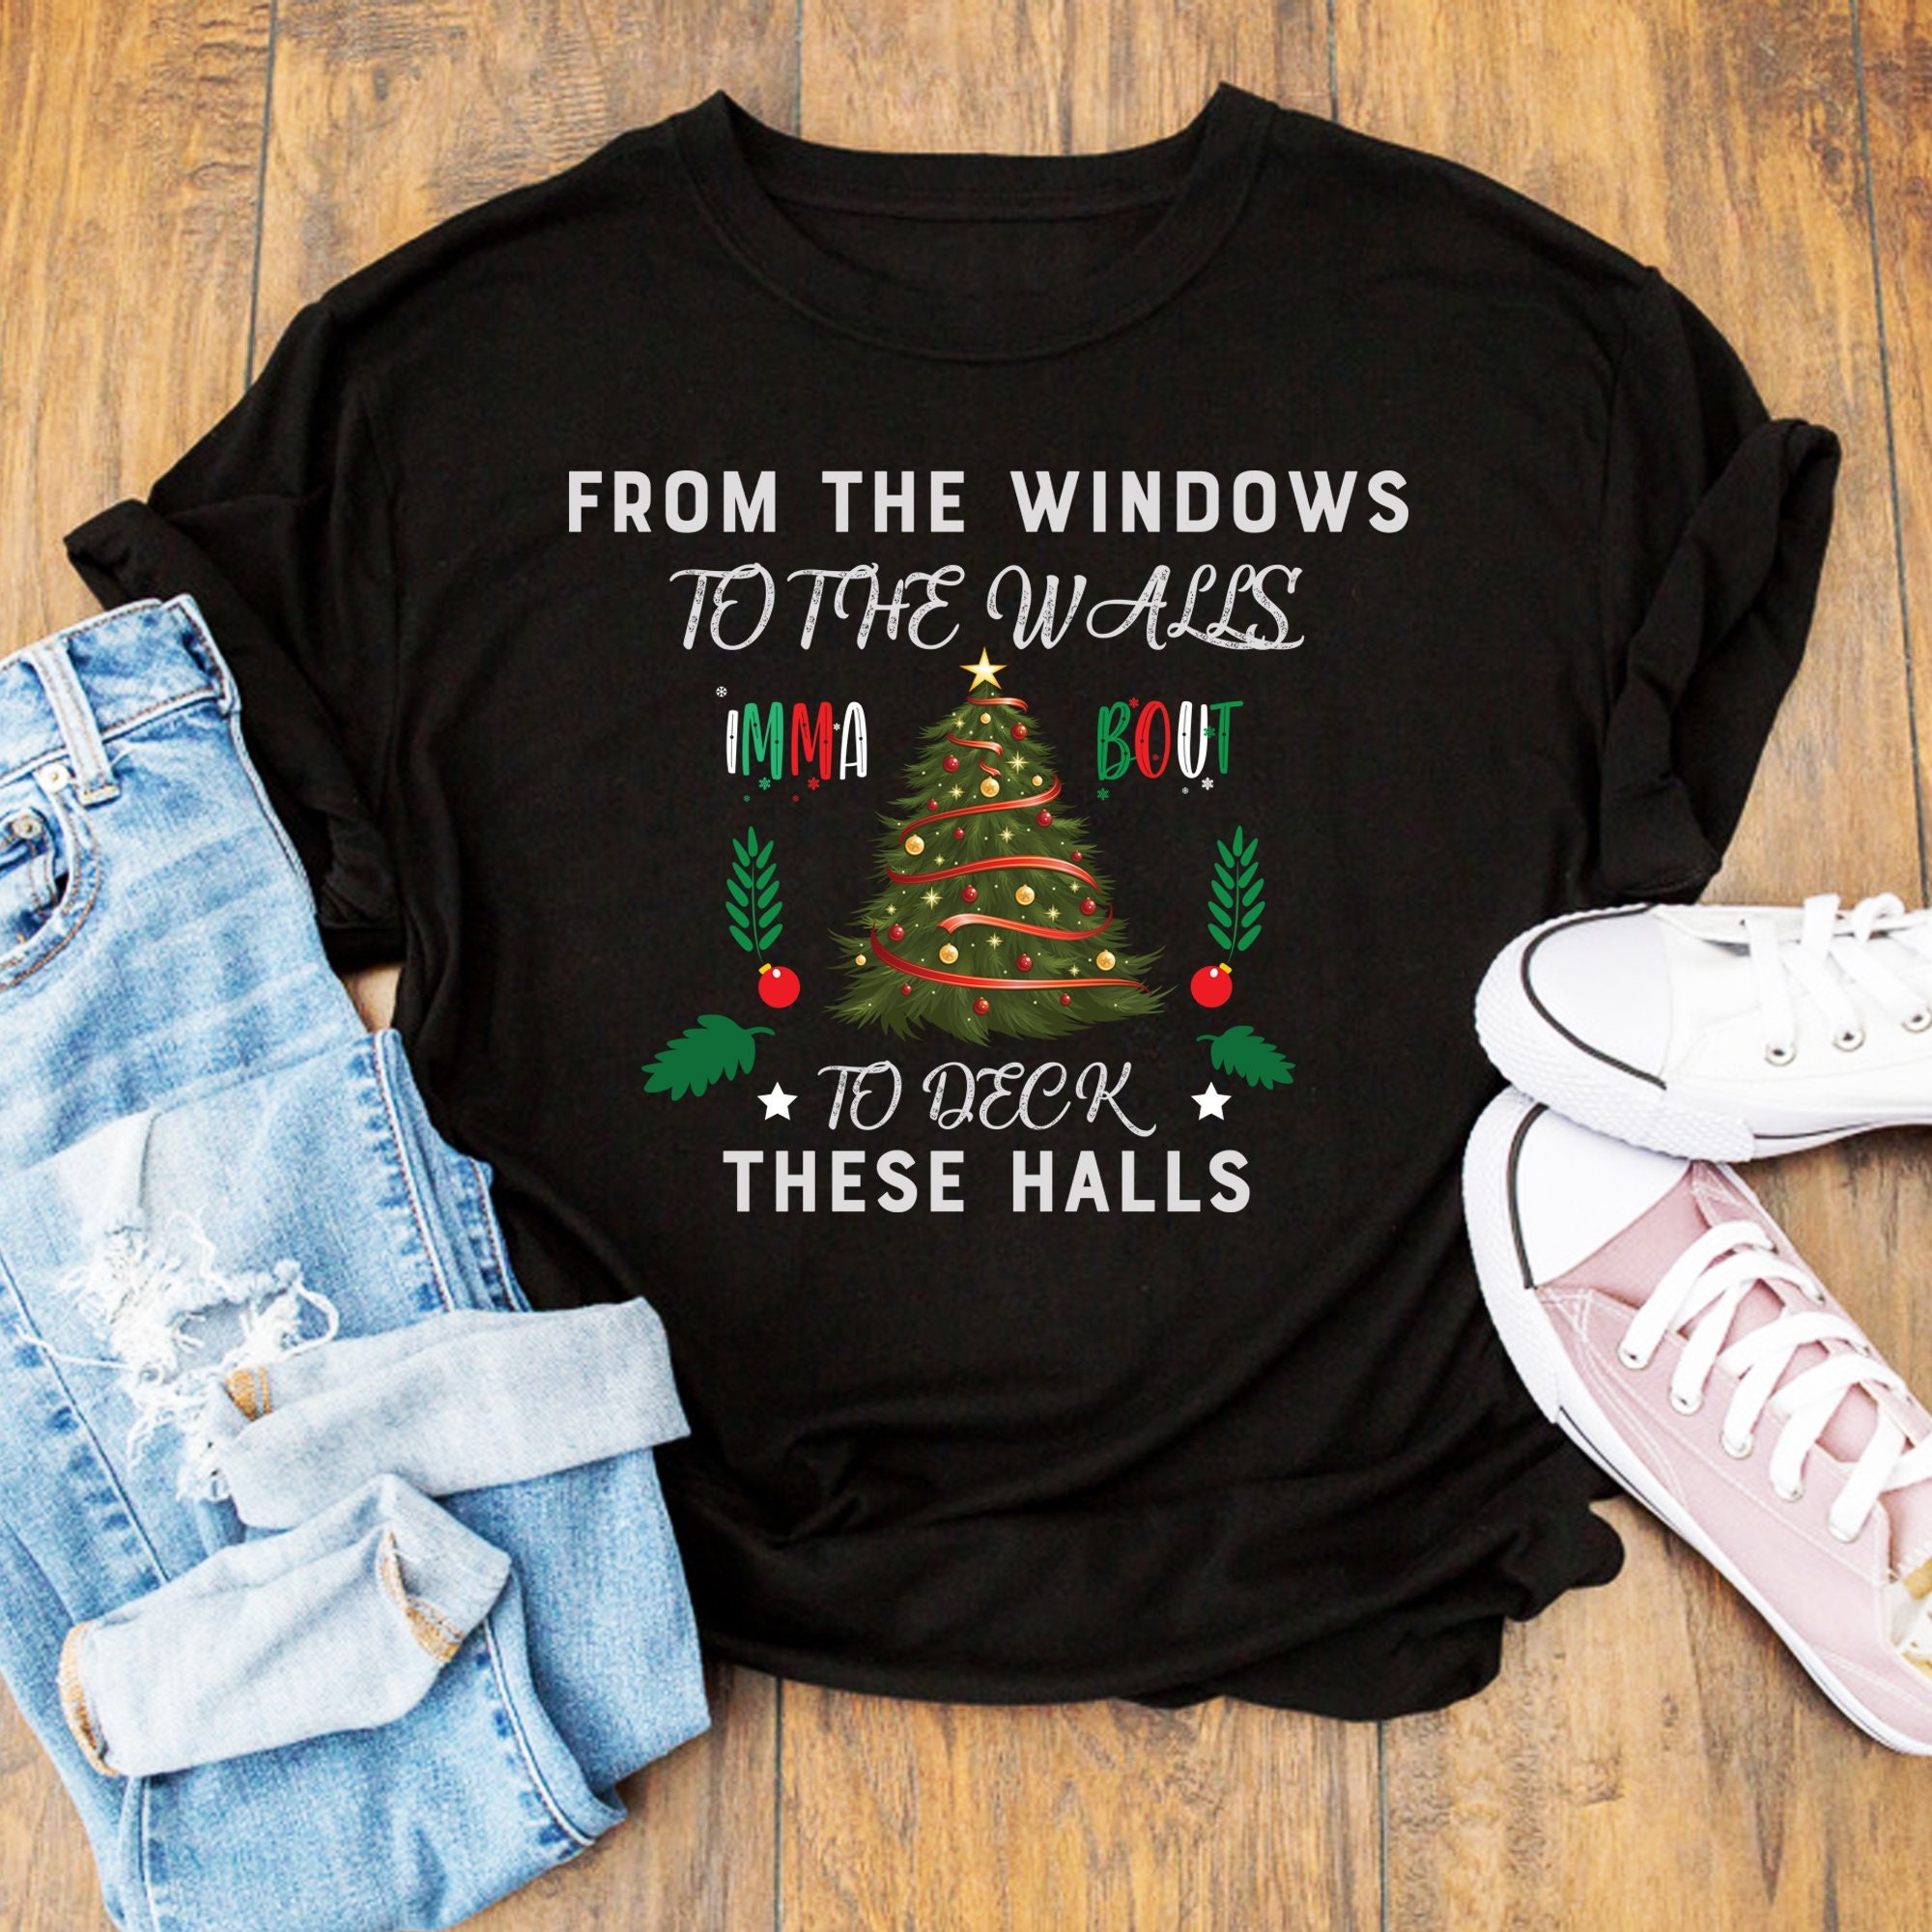 From the Windows to the walls Imma ’bout to deck these halls, Trending Christmas Shirt  Decorating Tee Short-Sleeve Unisex T-Shirt